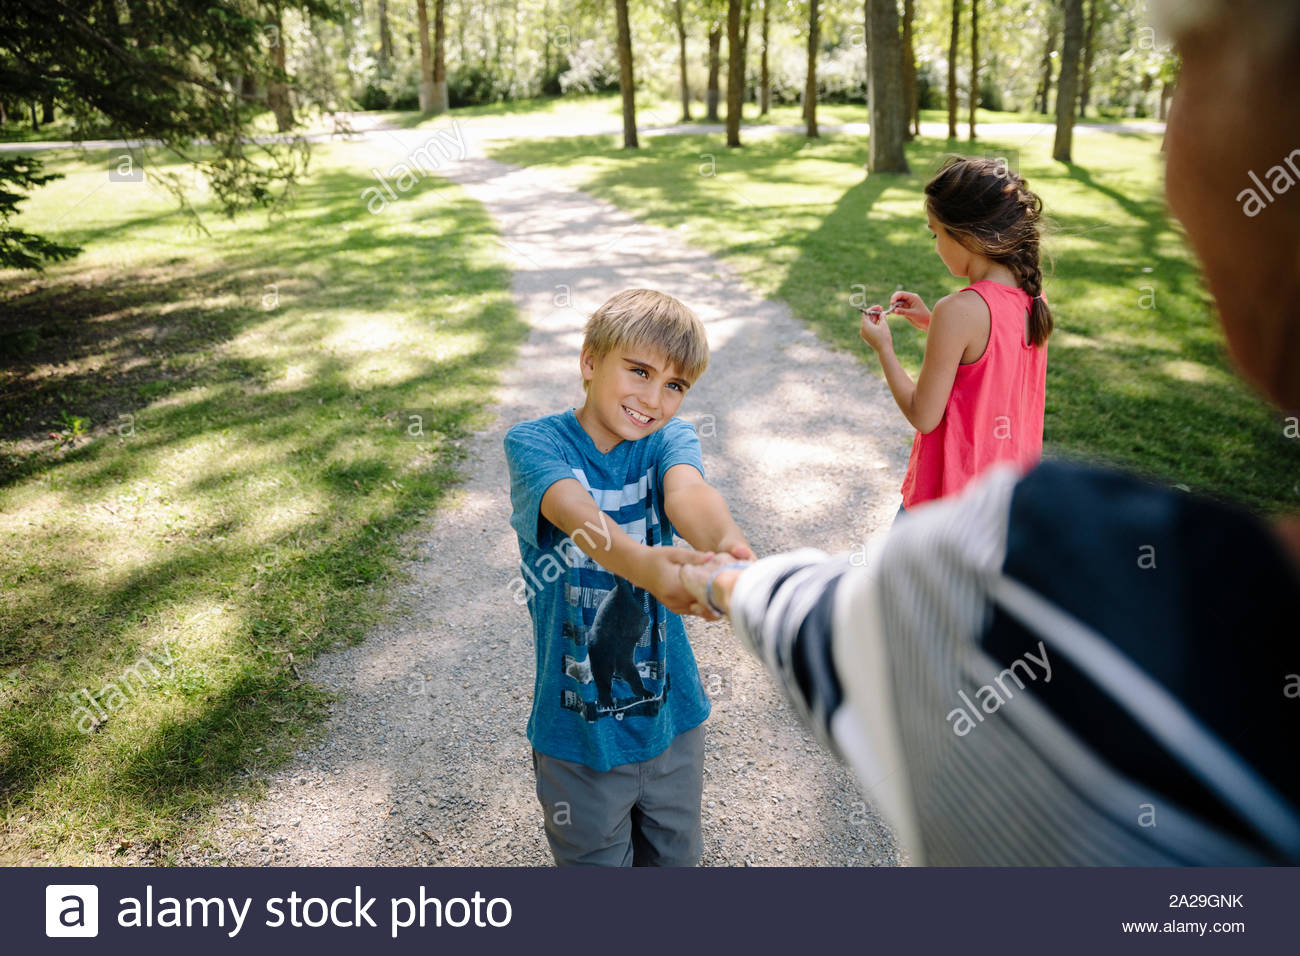 Grandson holding grandmother's hand in urban park Stock Photo